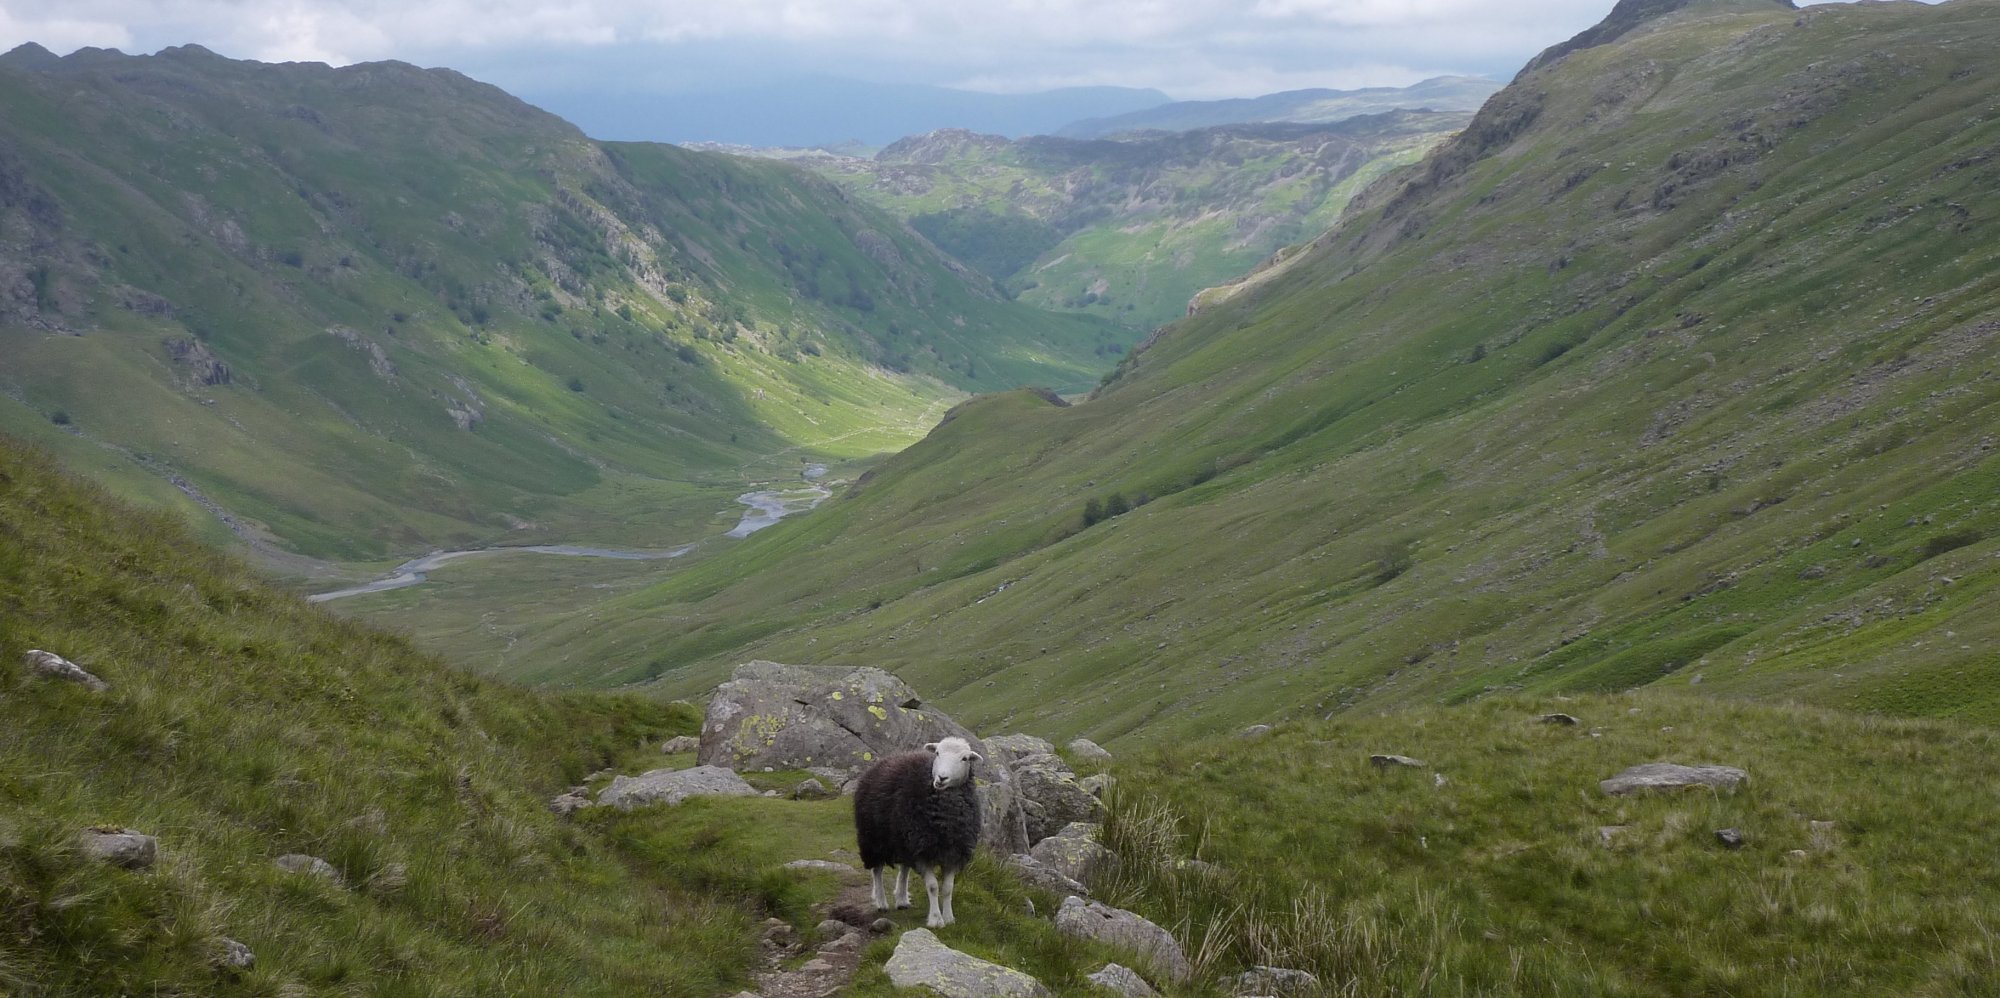 Looking down into Langstrath